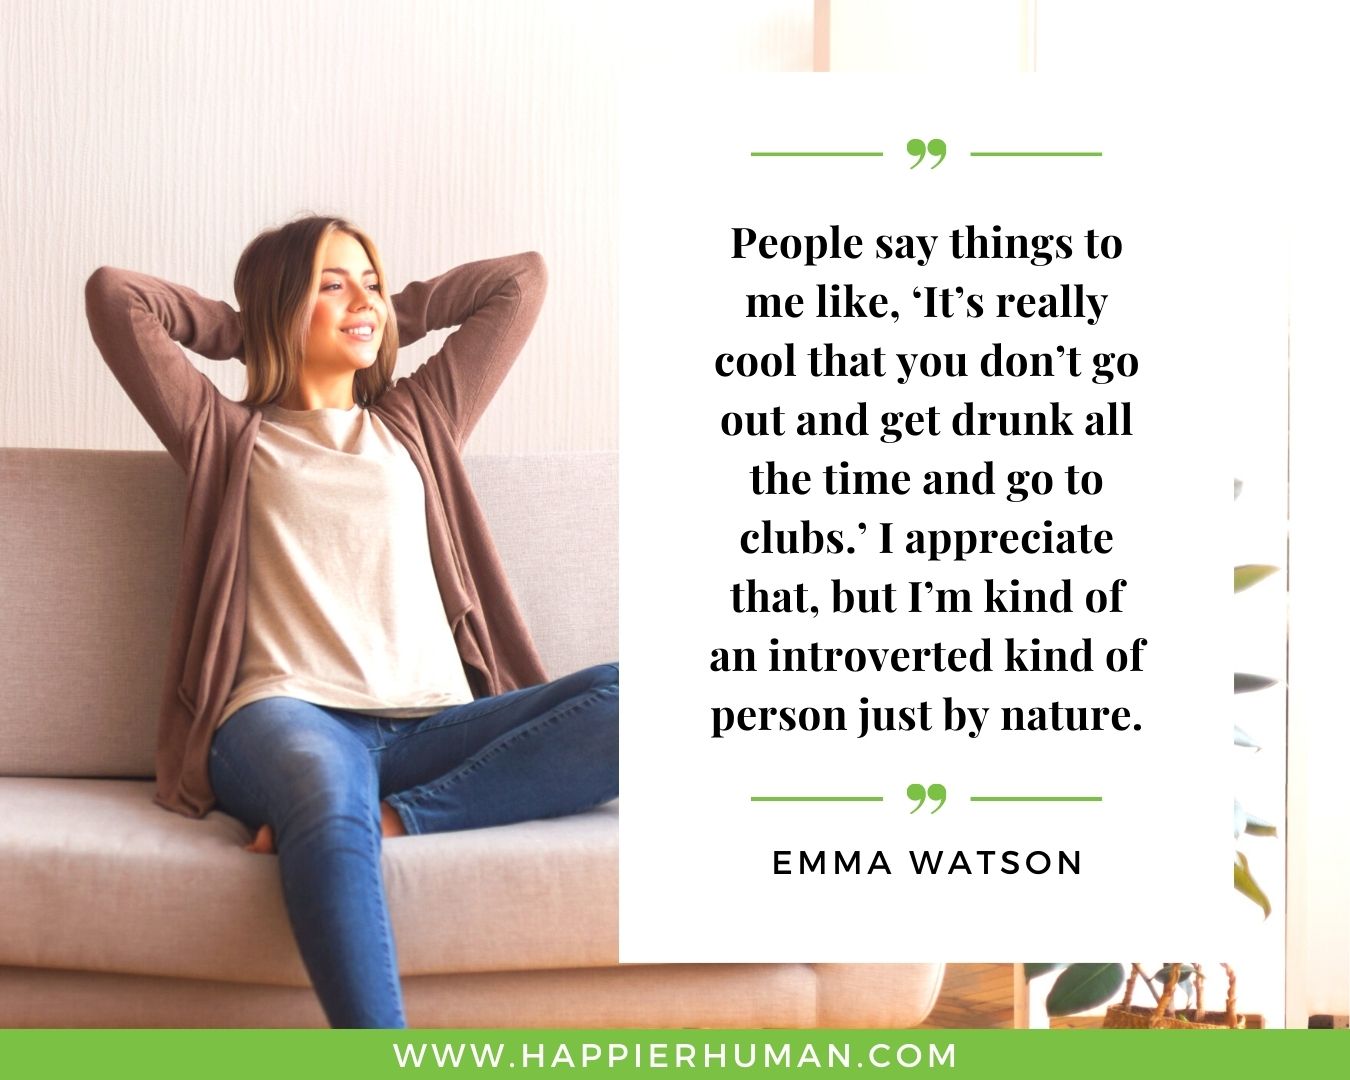 Introvert Quotes - “People say things to me like, ‘It’s really cool that you don’t go out and get drunk all the time and go to clubs.’ I appreciate that, but I’m kind of an introverted kind of person just by nature.” – Emma Watson